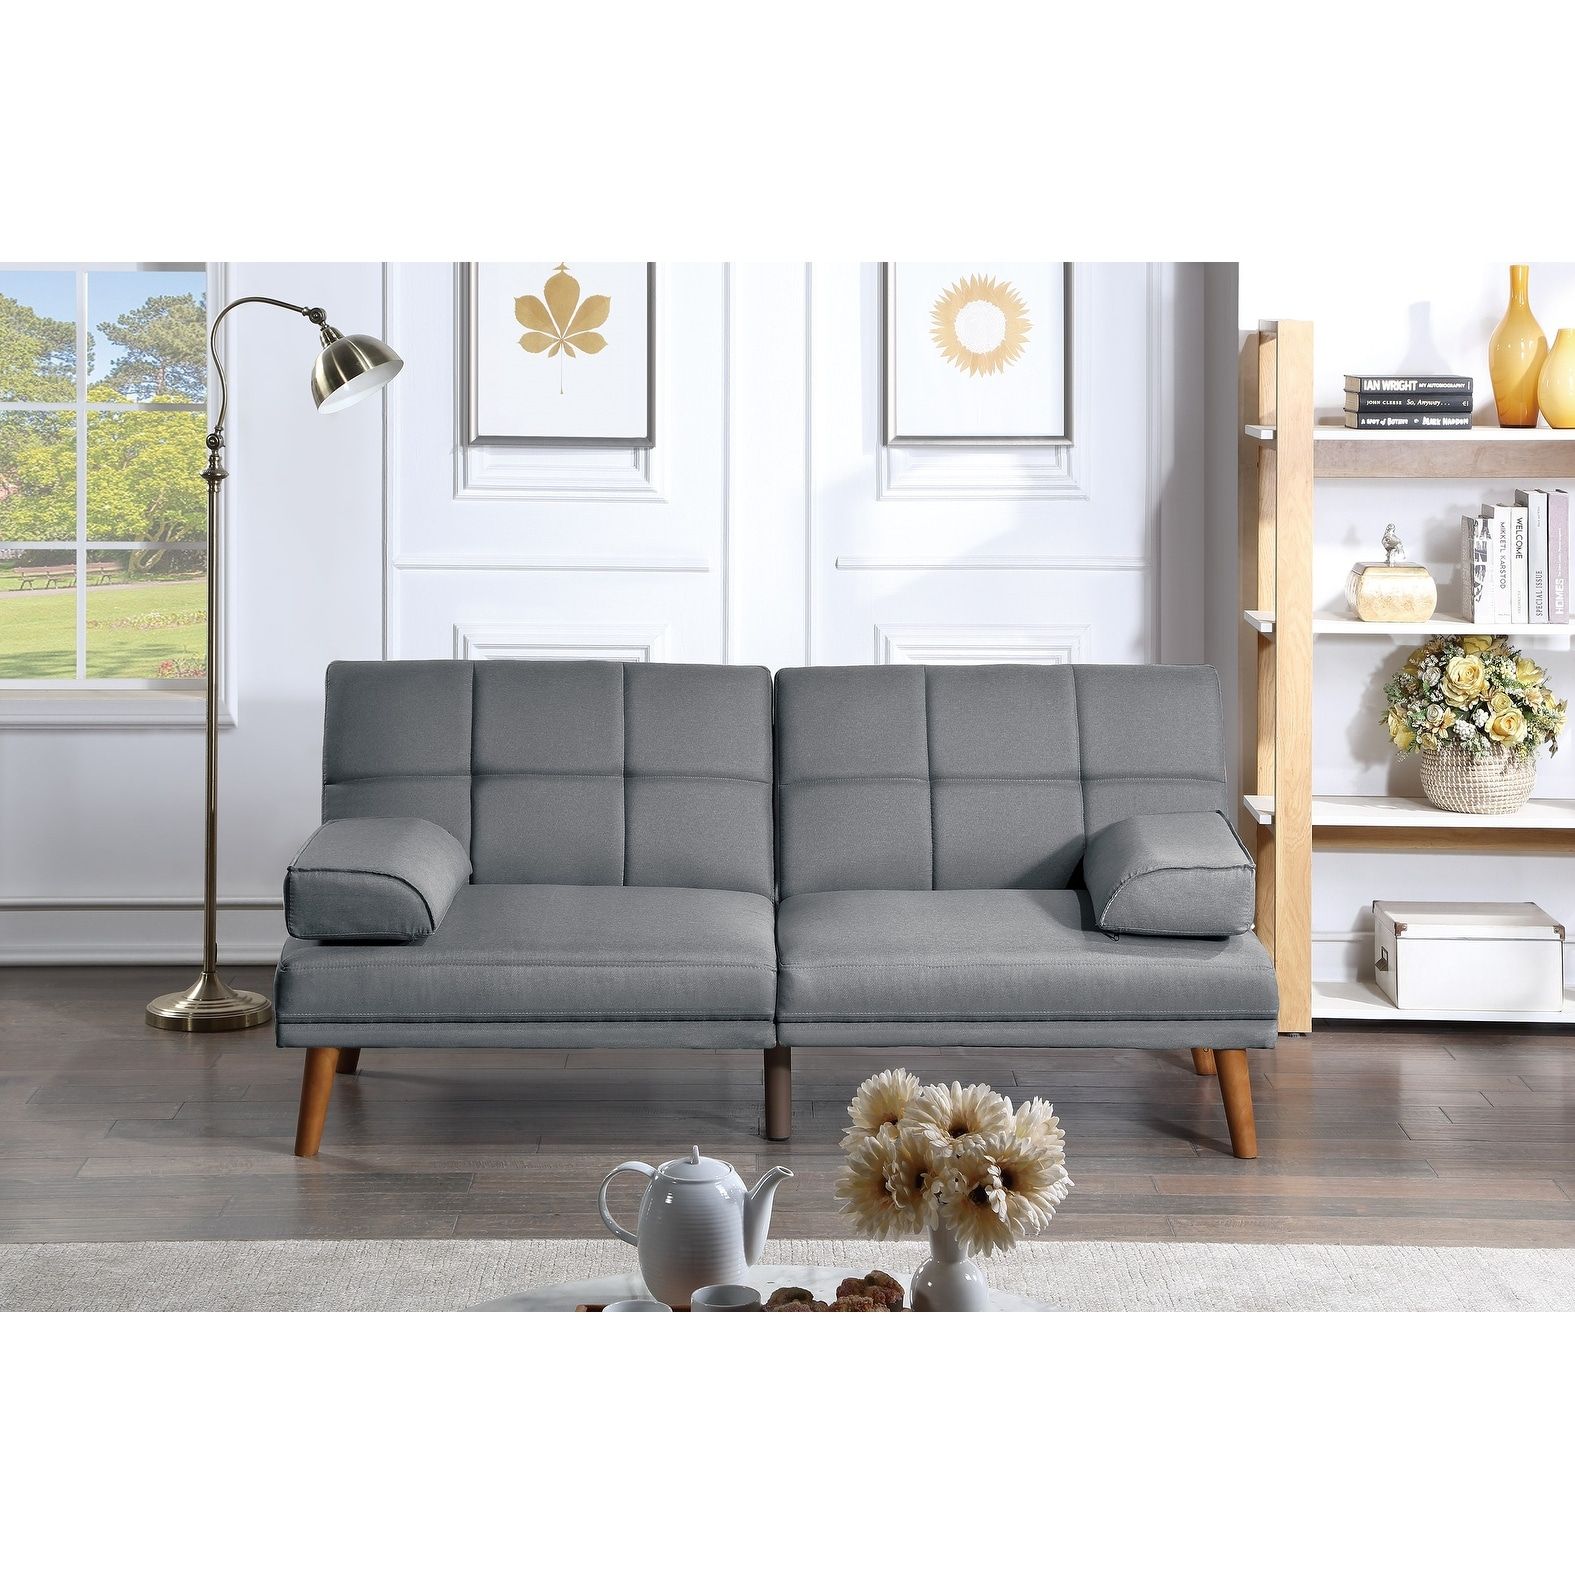 Contemporary Living Room Furniture Adjustable Sleeper Polyfiber Sofa  Comfort Tufted Couc With Solid Wood Legs & Pillow Back – Bed Bath & Beyond  – 35652000 Intended For Sofas With Pillowback Wood Bases (View 6 of 15)